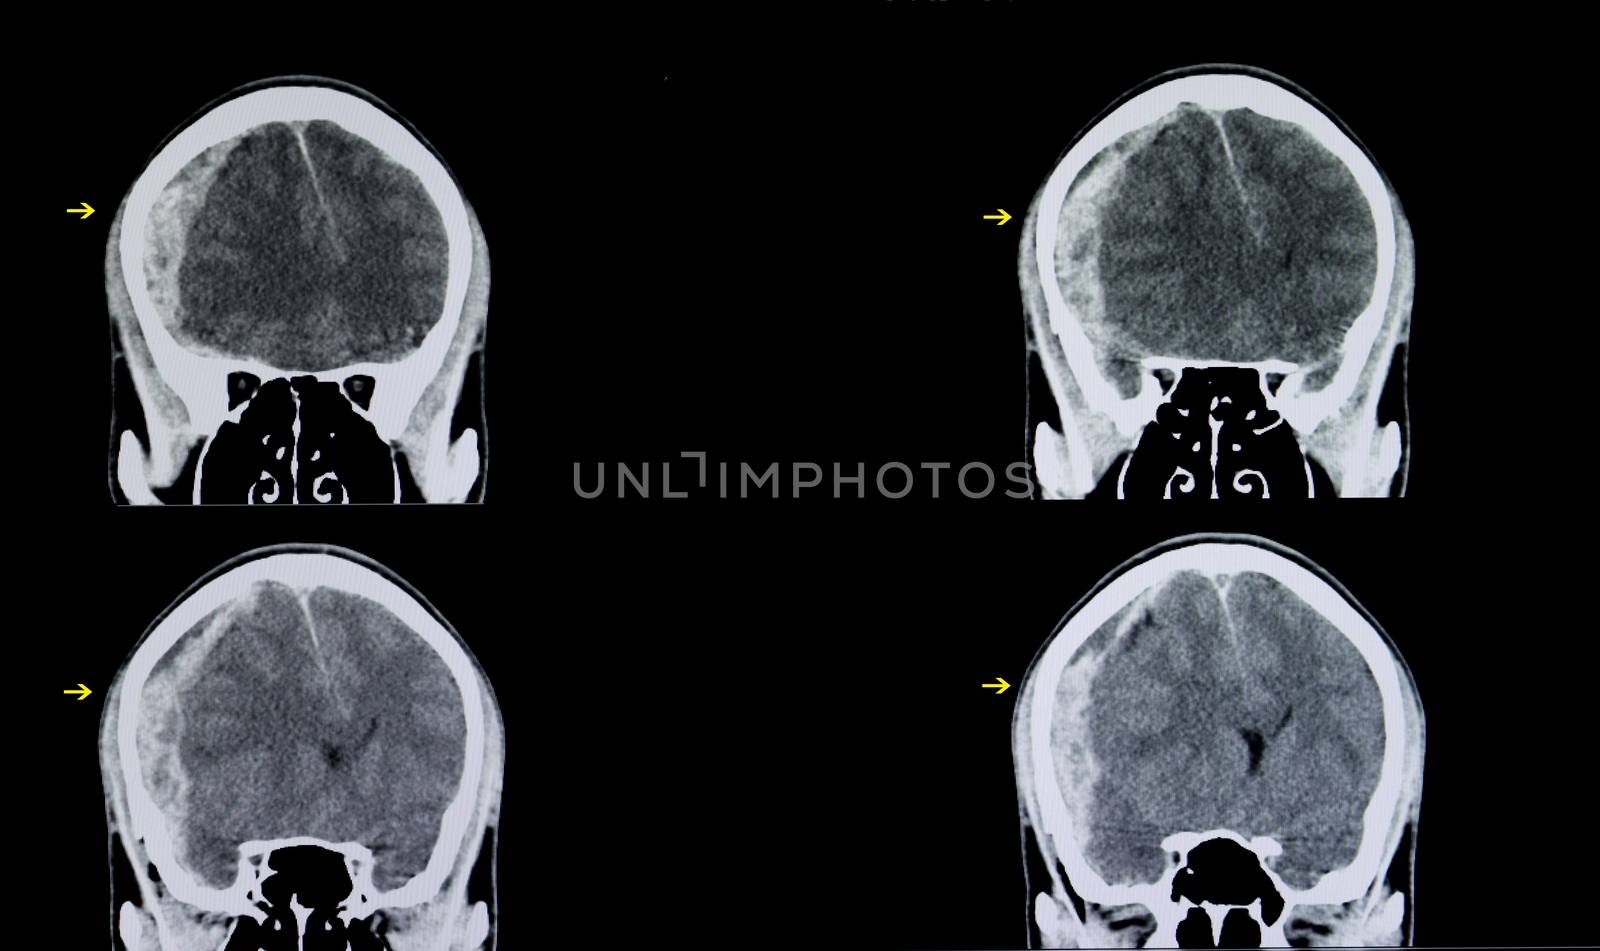 CT scan of a brain of a patient with traumatic head injury showing large subarachnoid hemorrhage in his right cerebral hemisphere with edema causing herniation of the tissue to the left side.